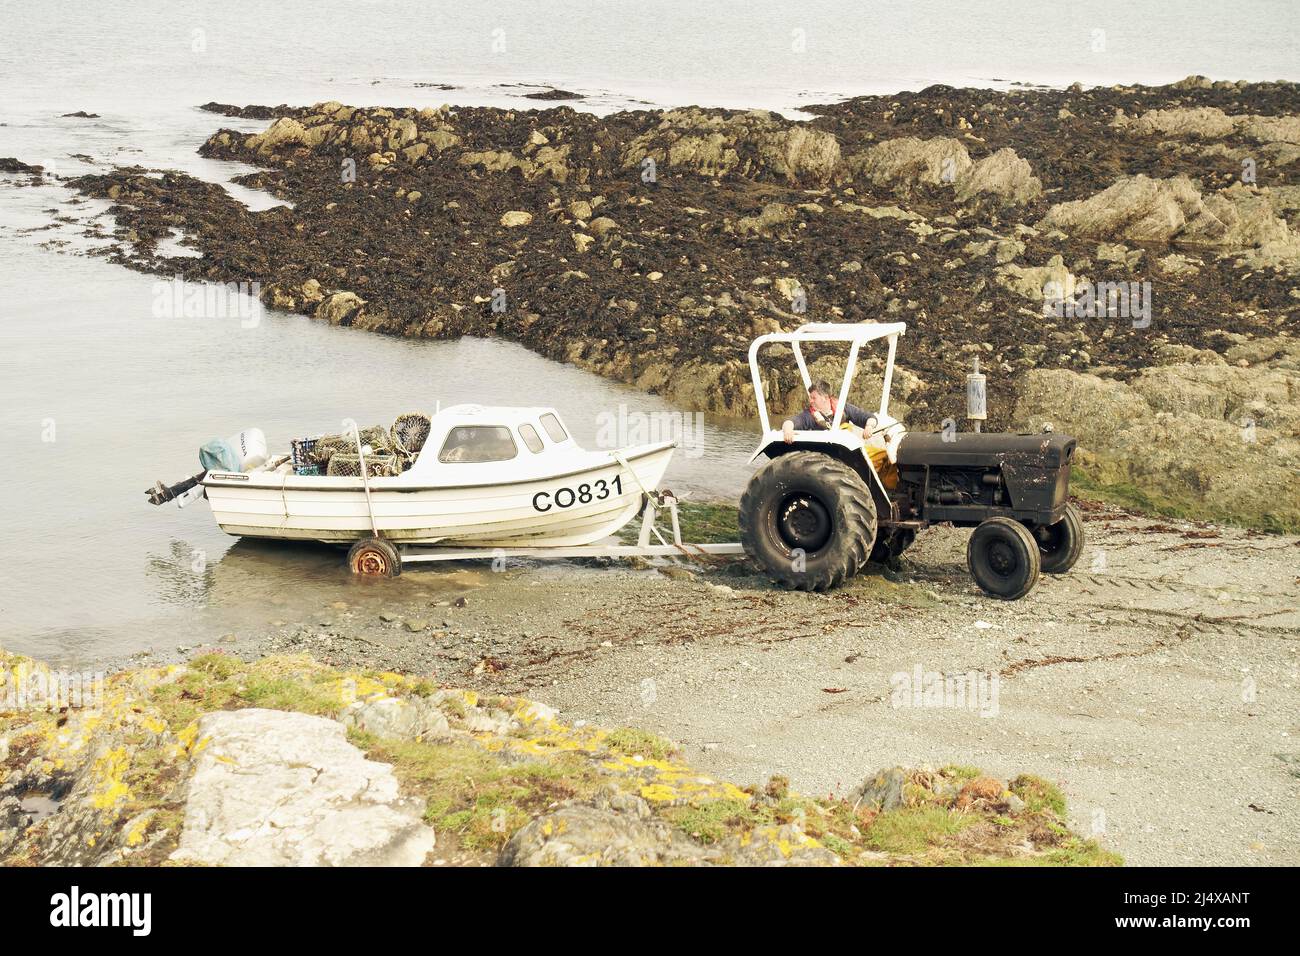 Welsh fisherman launches his boat into the tiny cove at Porth Conlon, on the beautiful Llyn Peninsula, Gwyneth, North Wales Stock Photo